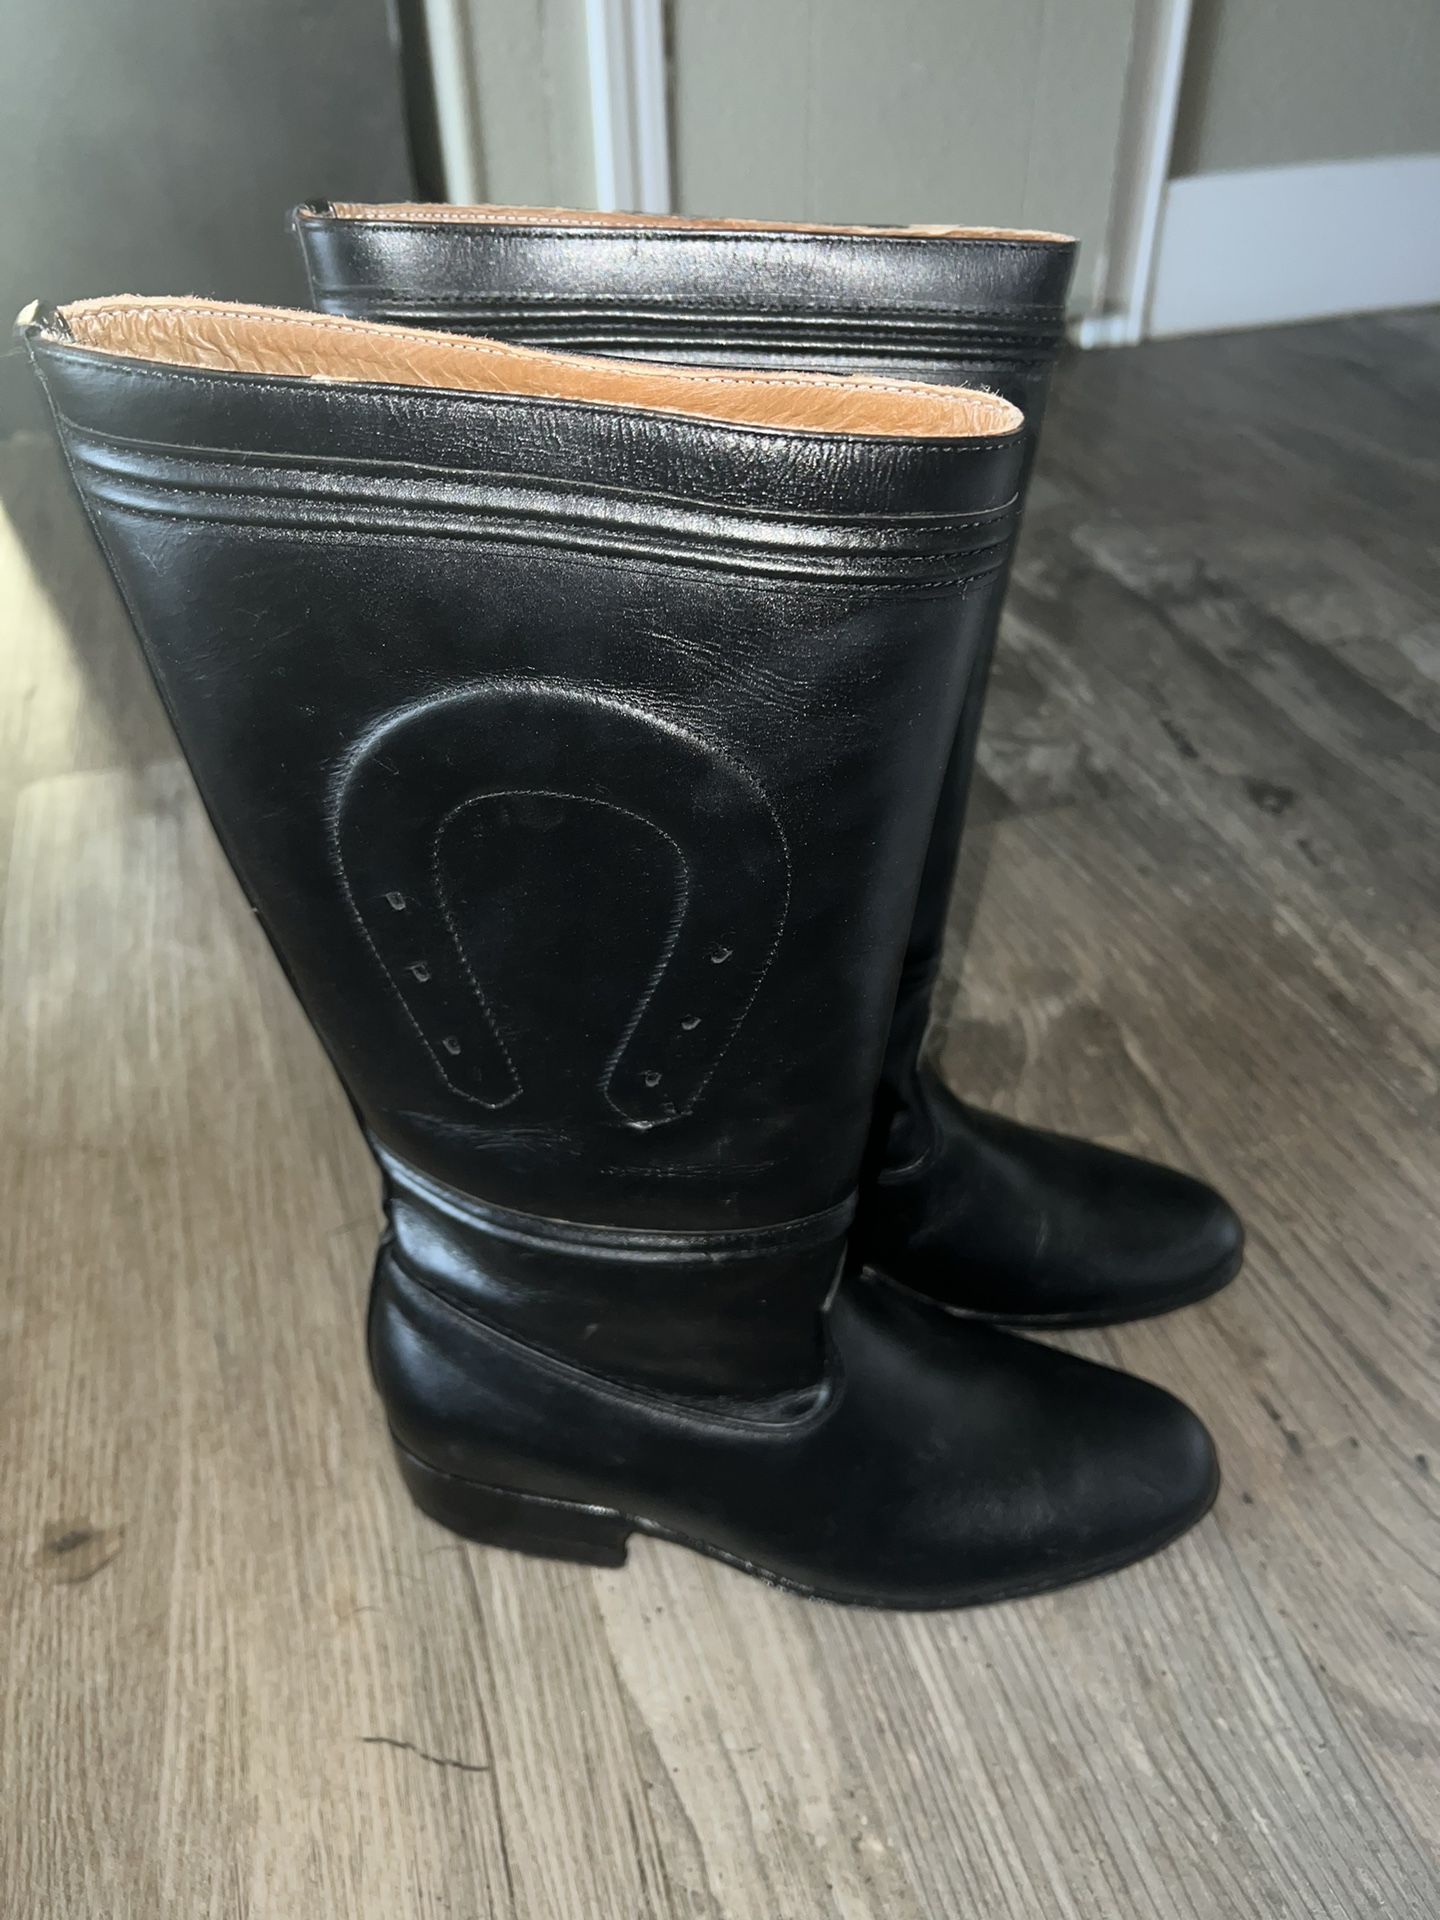 Riding Boots Womens 